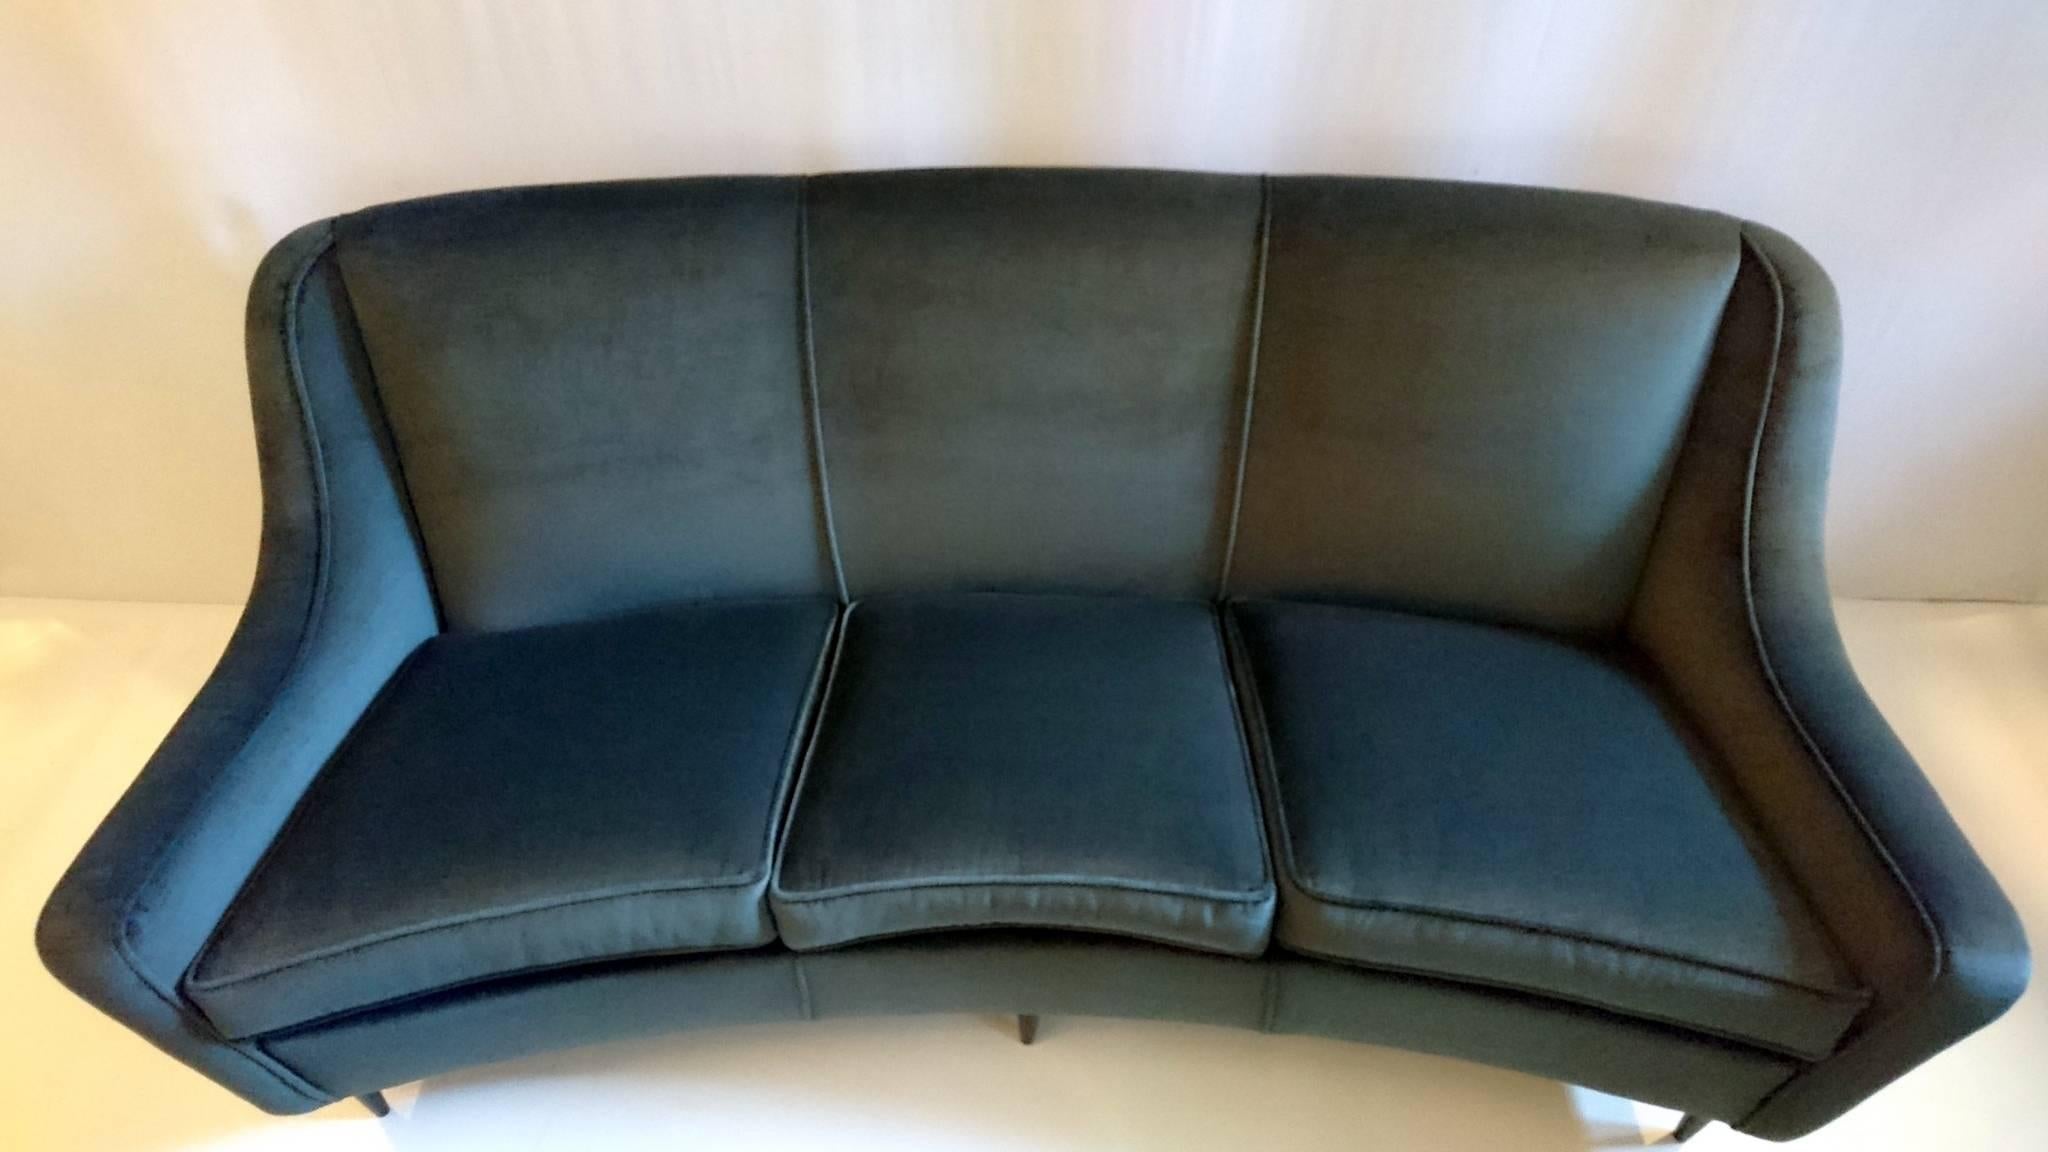 This sofa has recently been professionally completely reupholstered in a soft grey velvet fabric. Seats three people comfortably. Has blackened wooden legs.